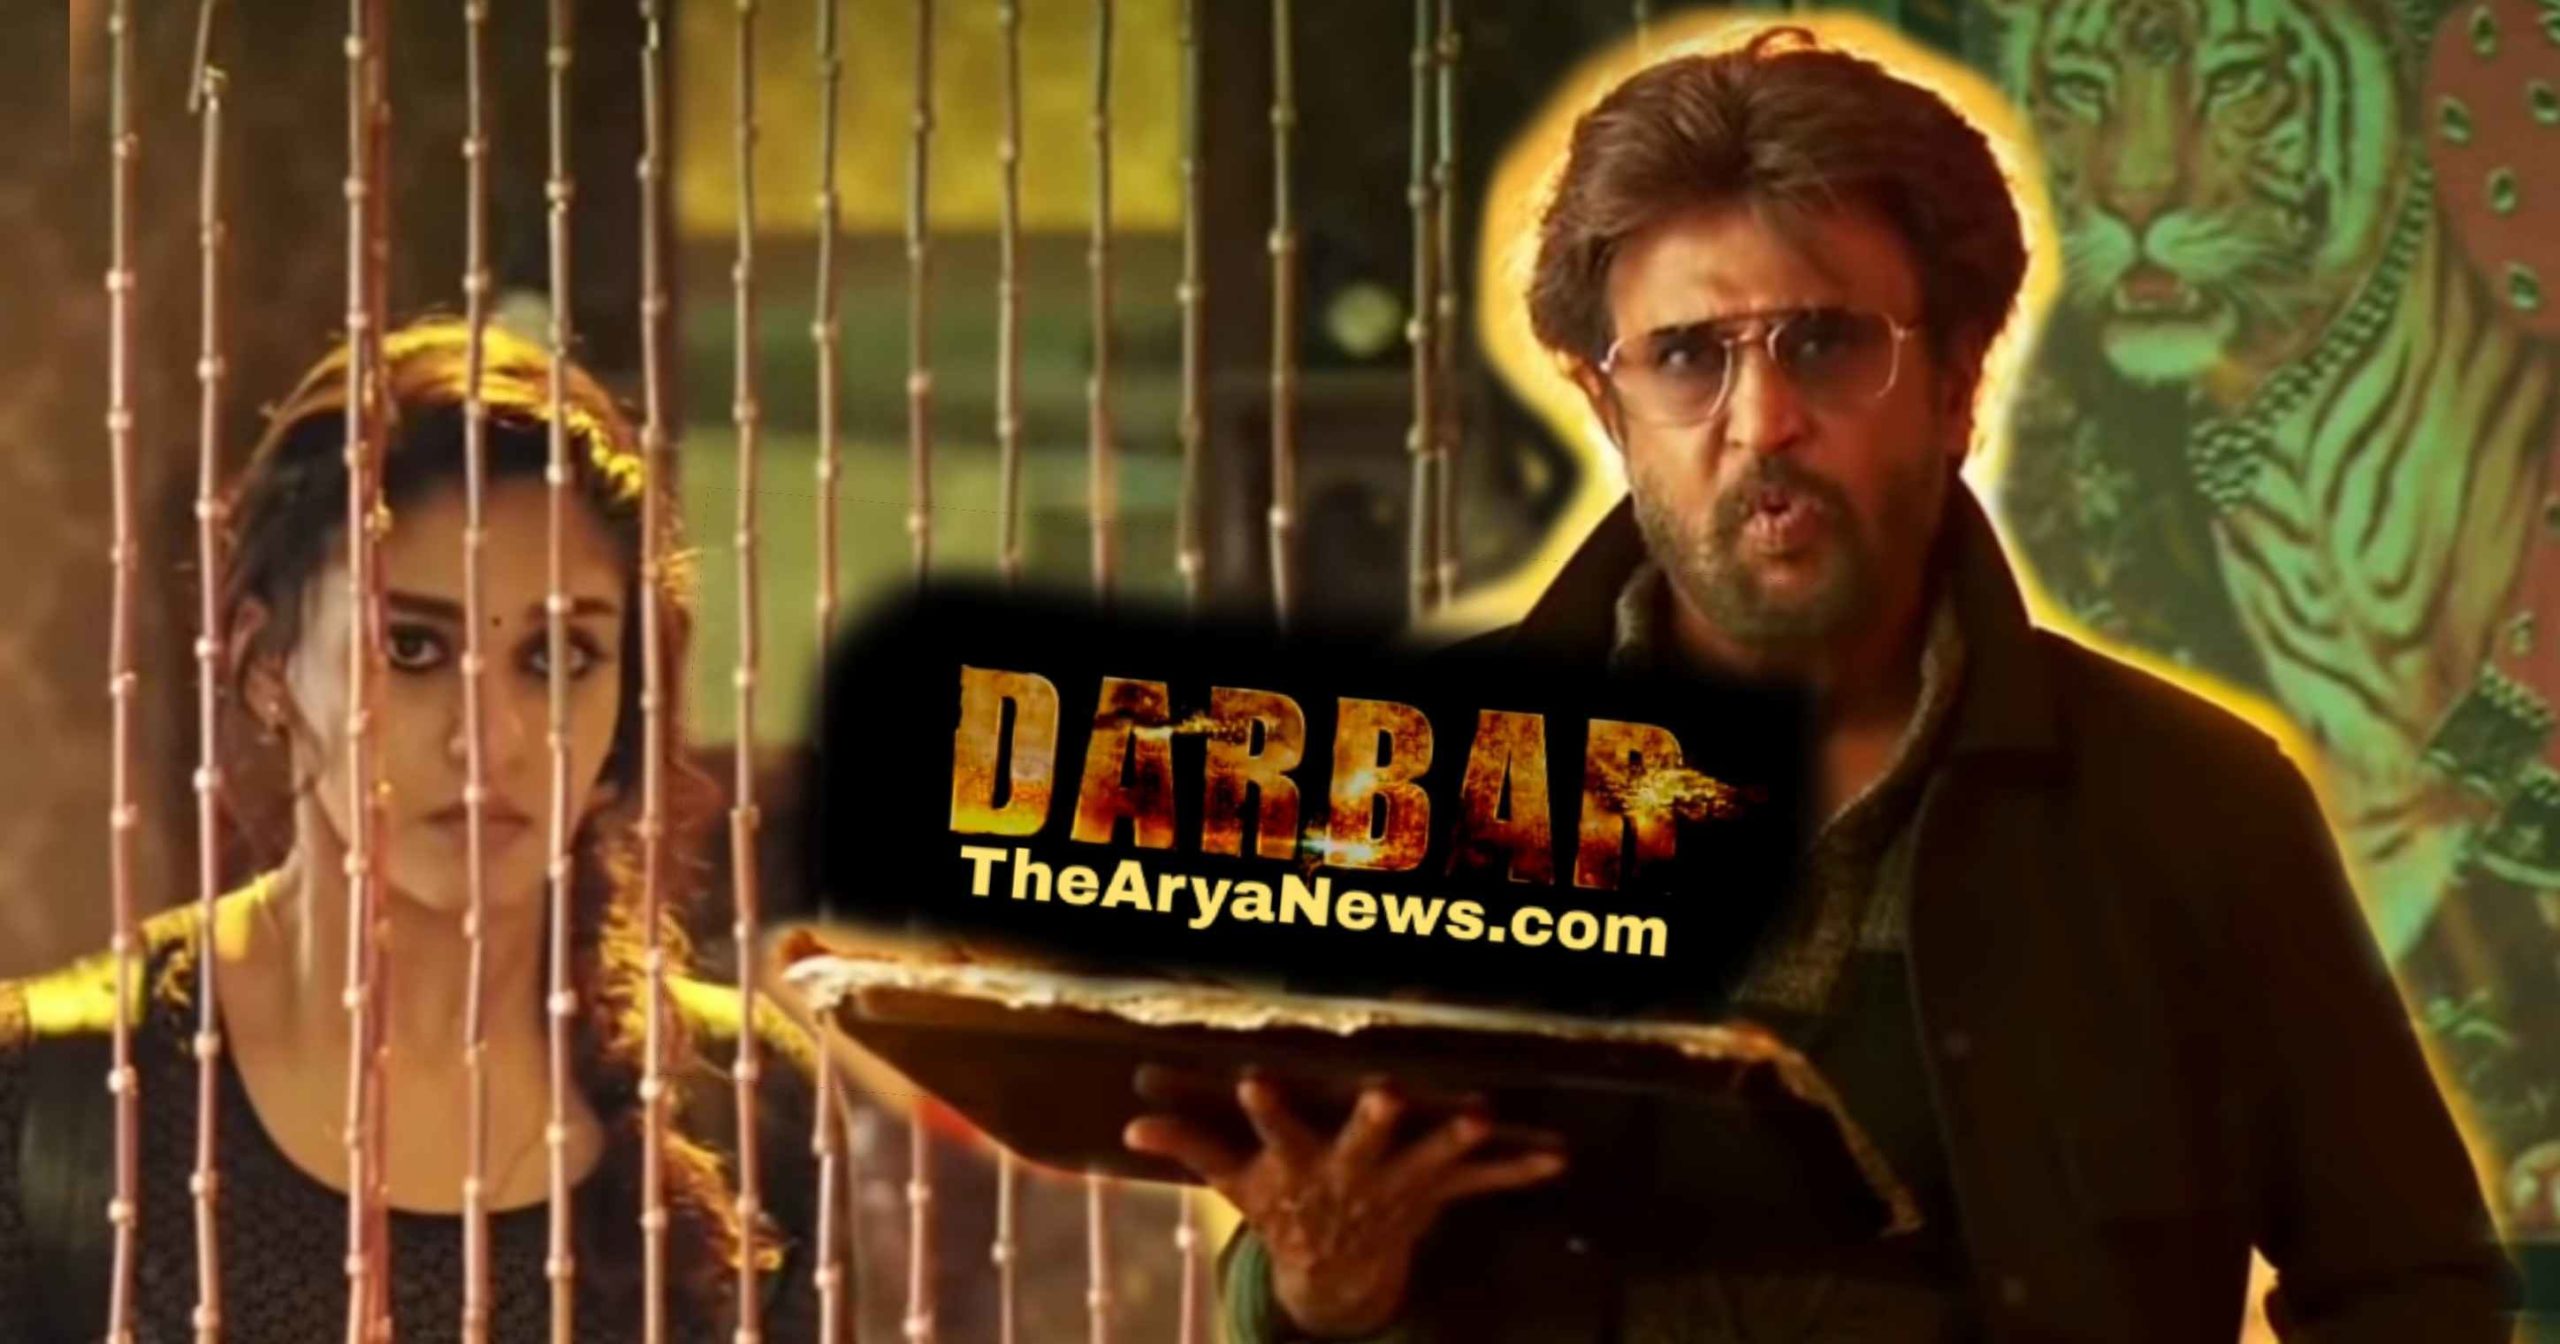 Darbar Movie - Here Is How People Reacted To the Action-Packed Movie Rajinikanth